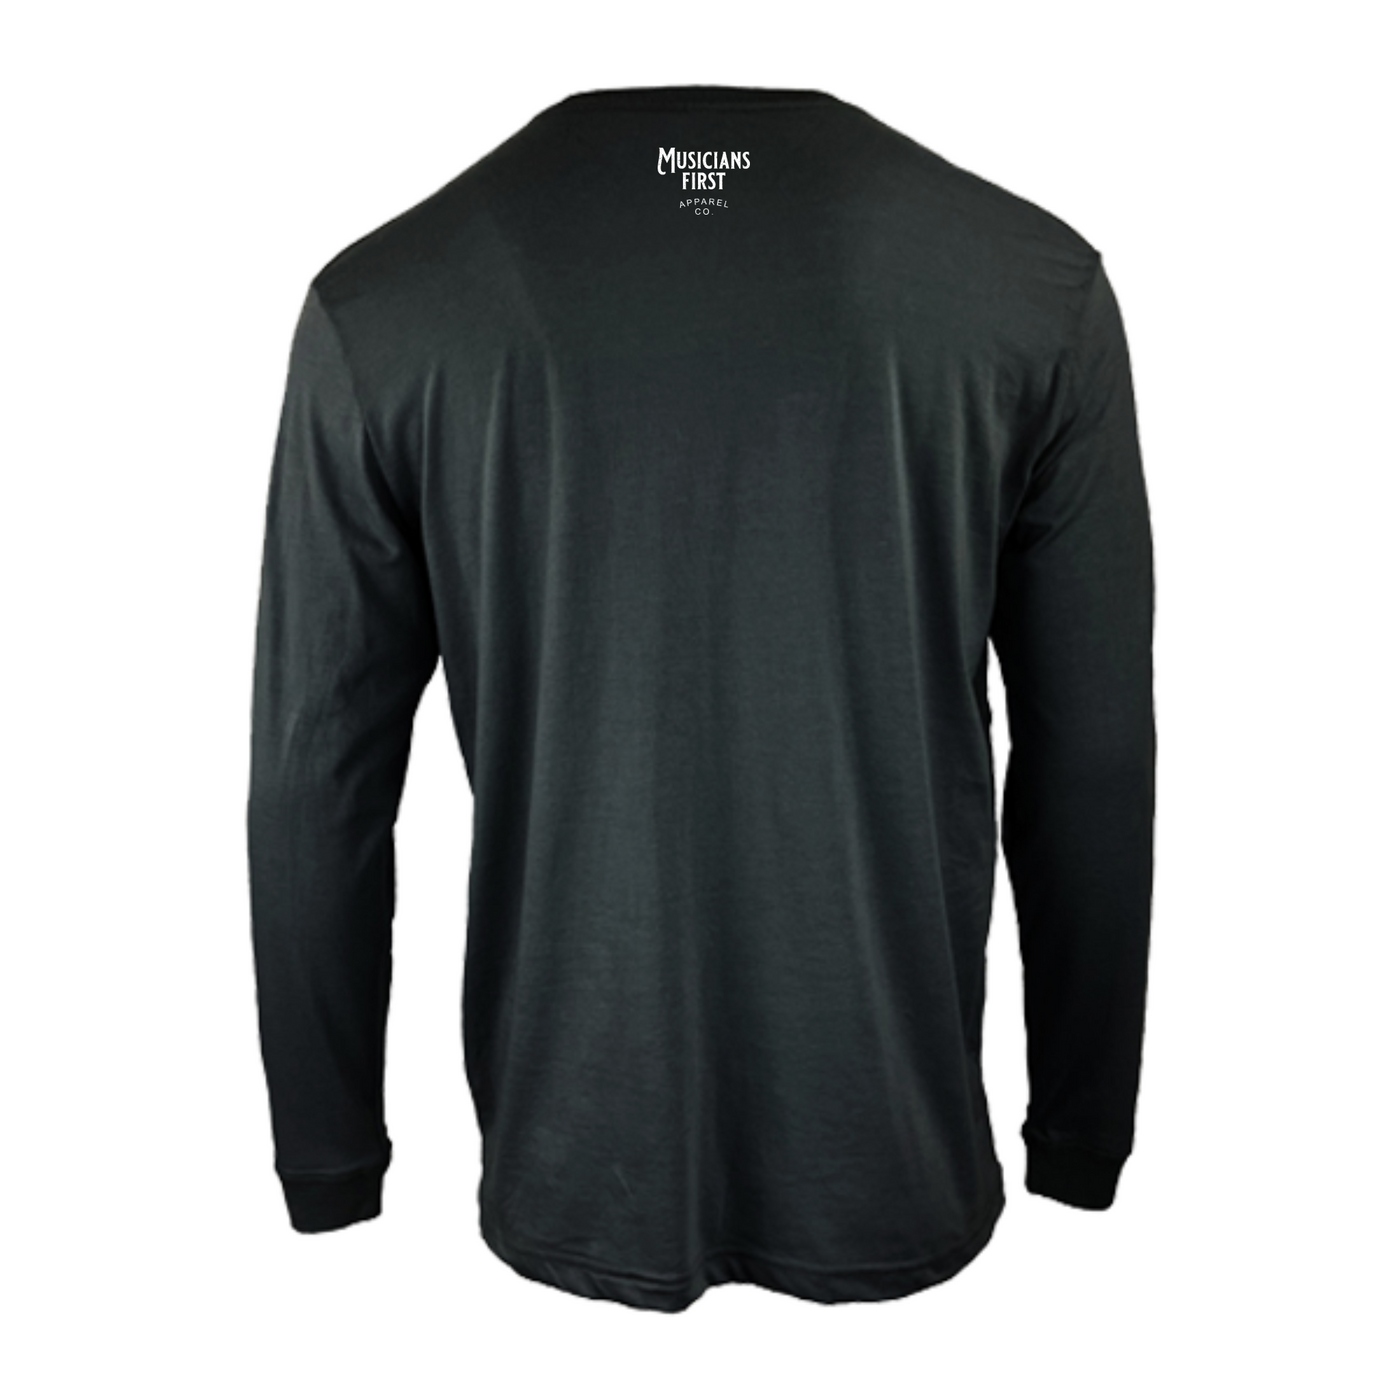 Musicians First Apparel Co. "Rock On" Logo Long Sleeve: Solid Black